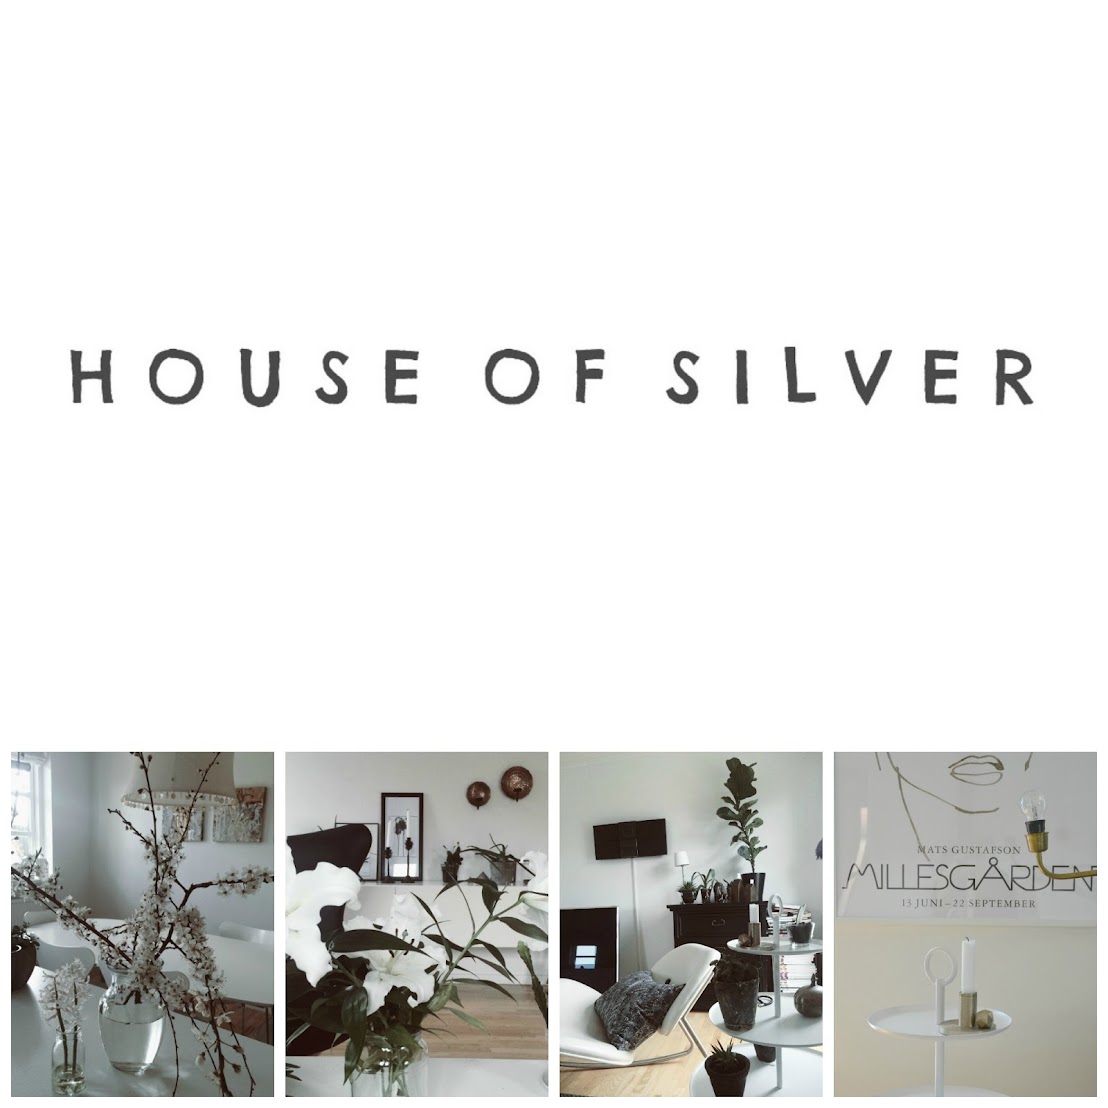 HOUSE OF SILVER